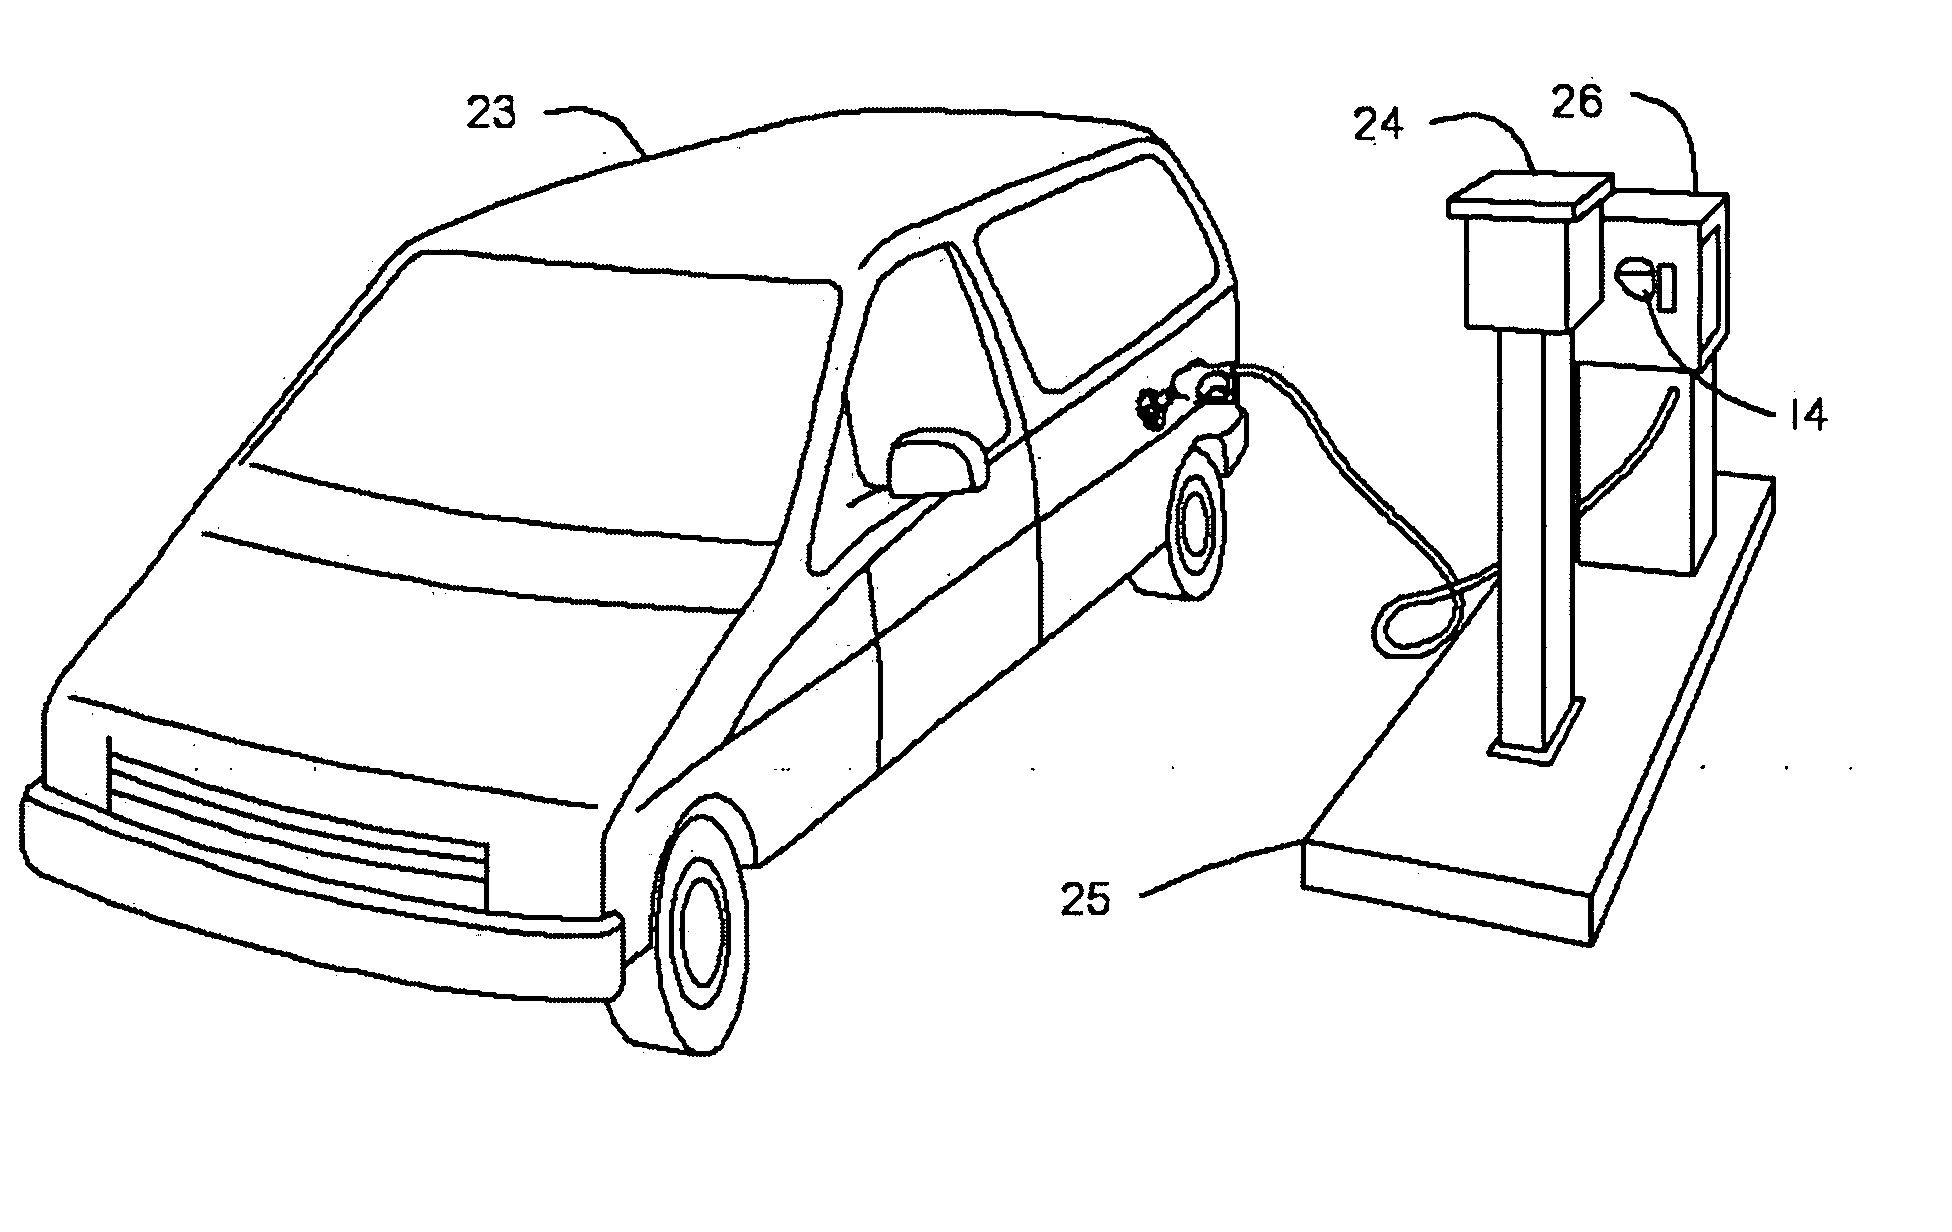 Apparatus for an automotive data control, acquisition and transfer system